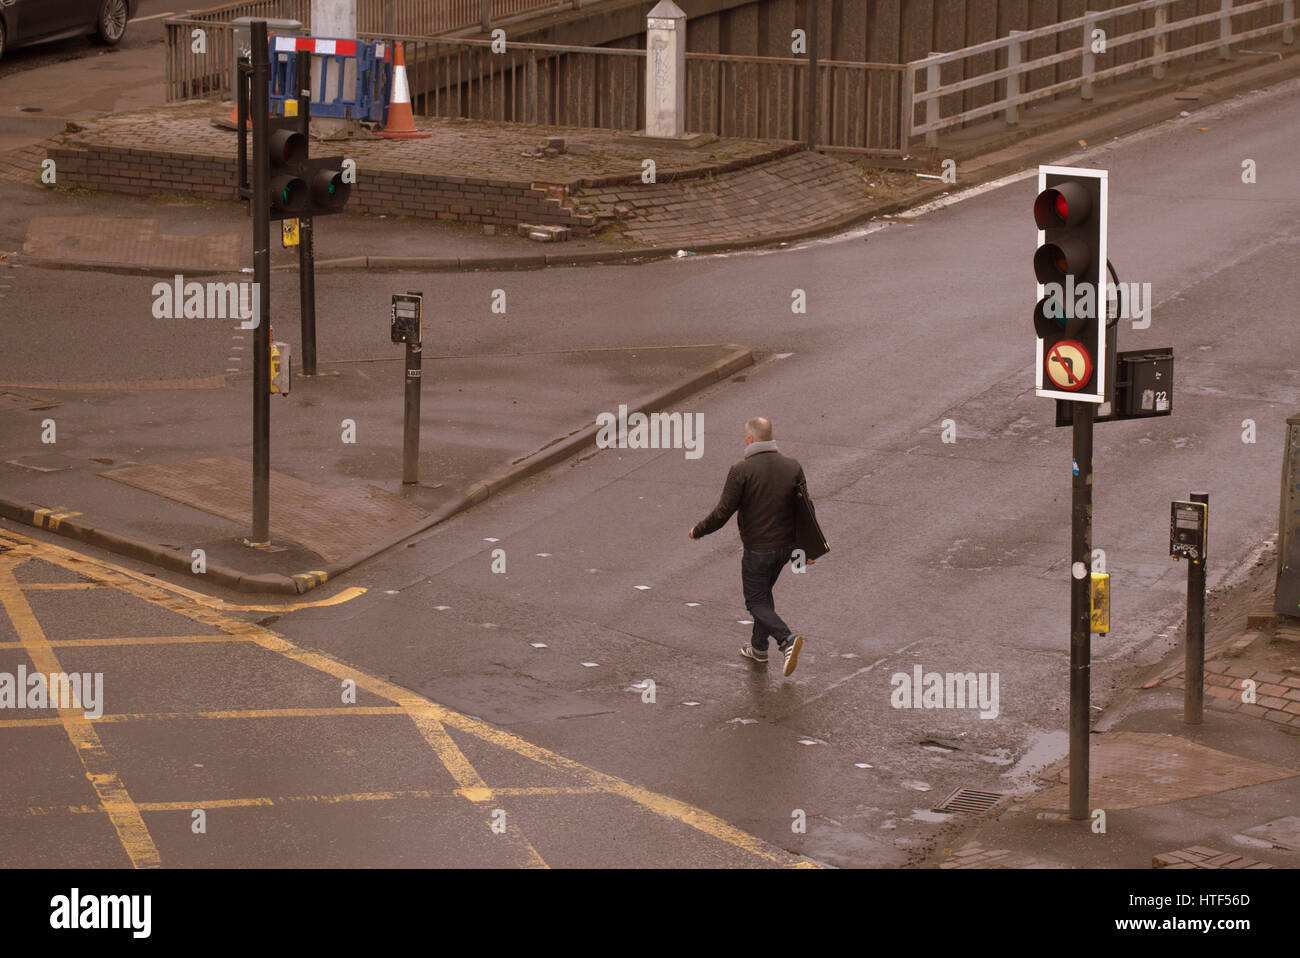 Glasgow City cityscape street scene crossing road at traffic lights young guy Stock Photo